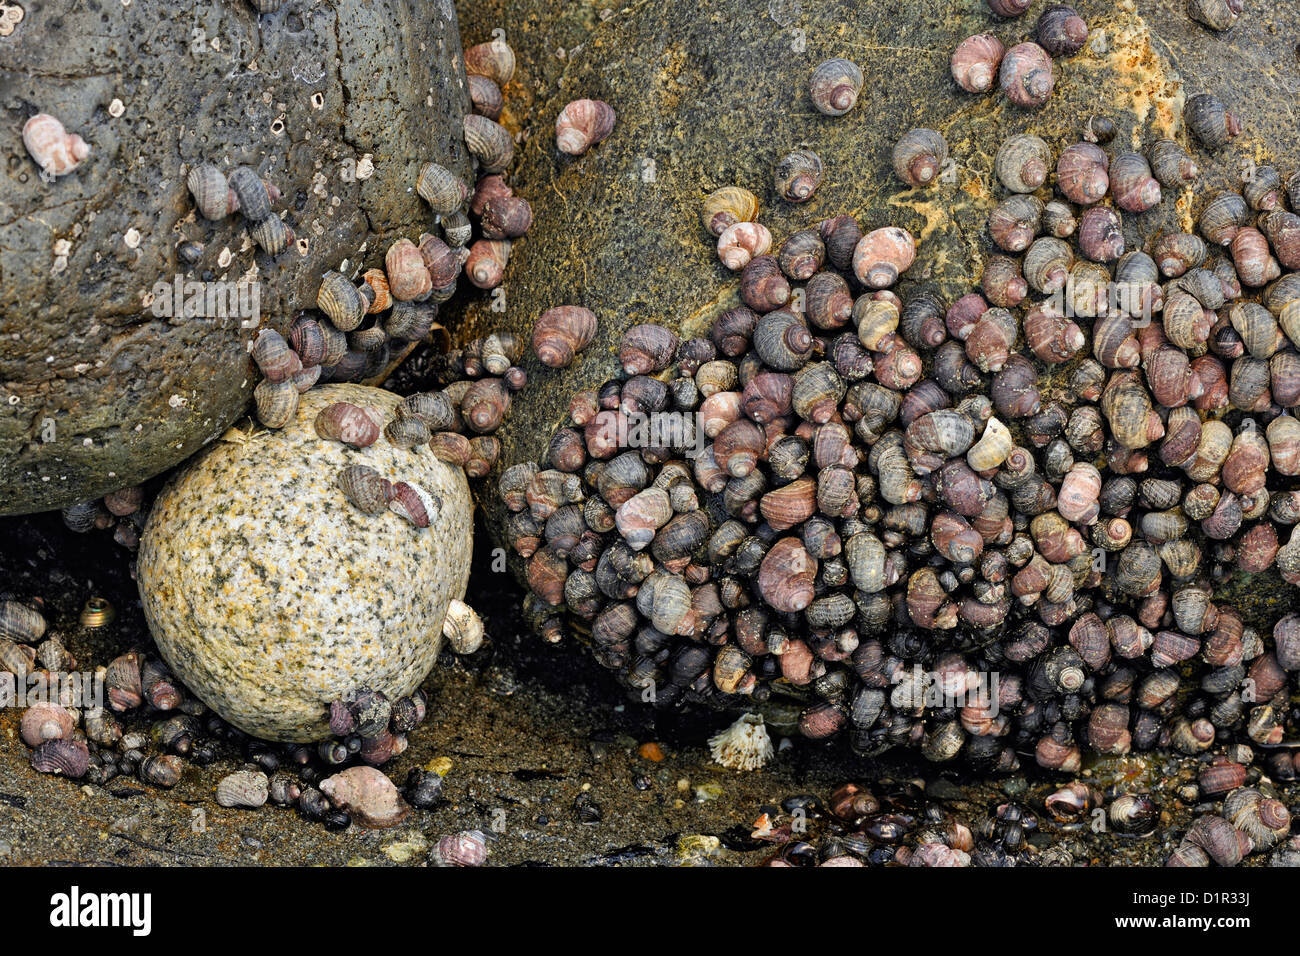 Northern striped dogwinkle (Nucella ostrina) clinging to rocks in the splash zone at low tide, Whiffen Spit (Sooke), BC, Canada Stock Photo